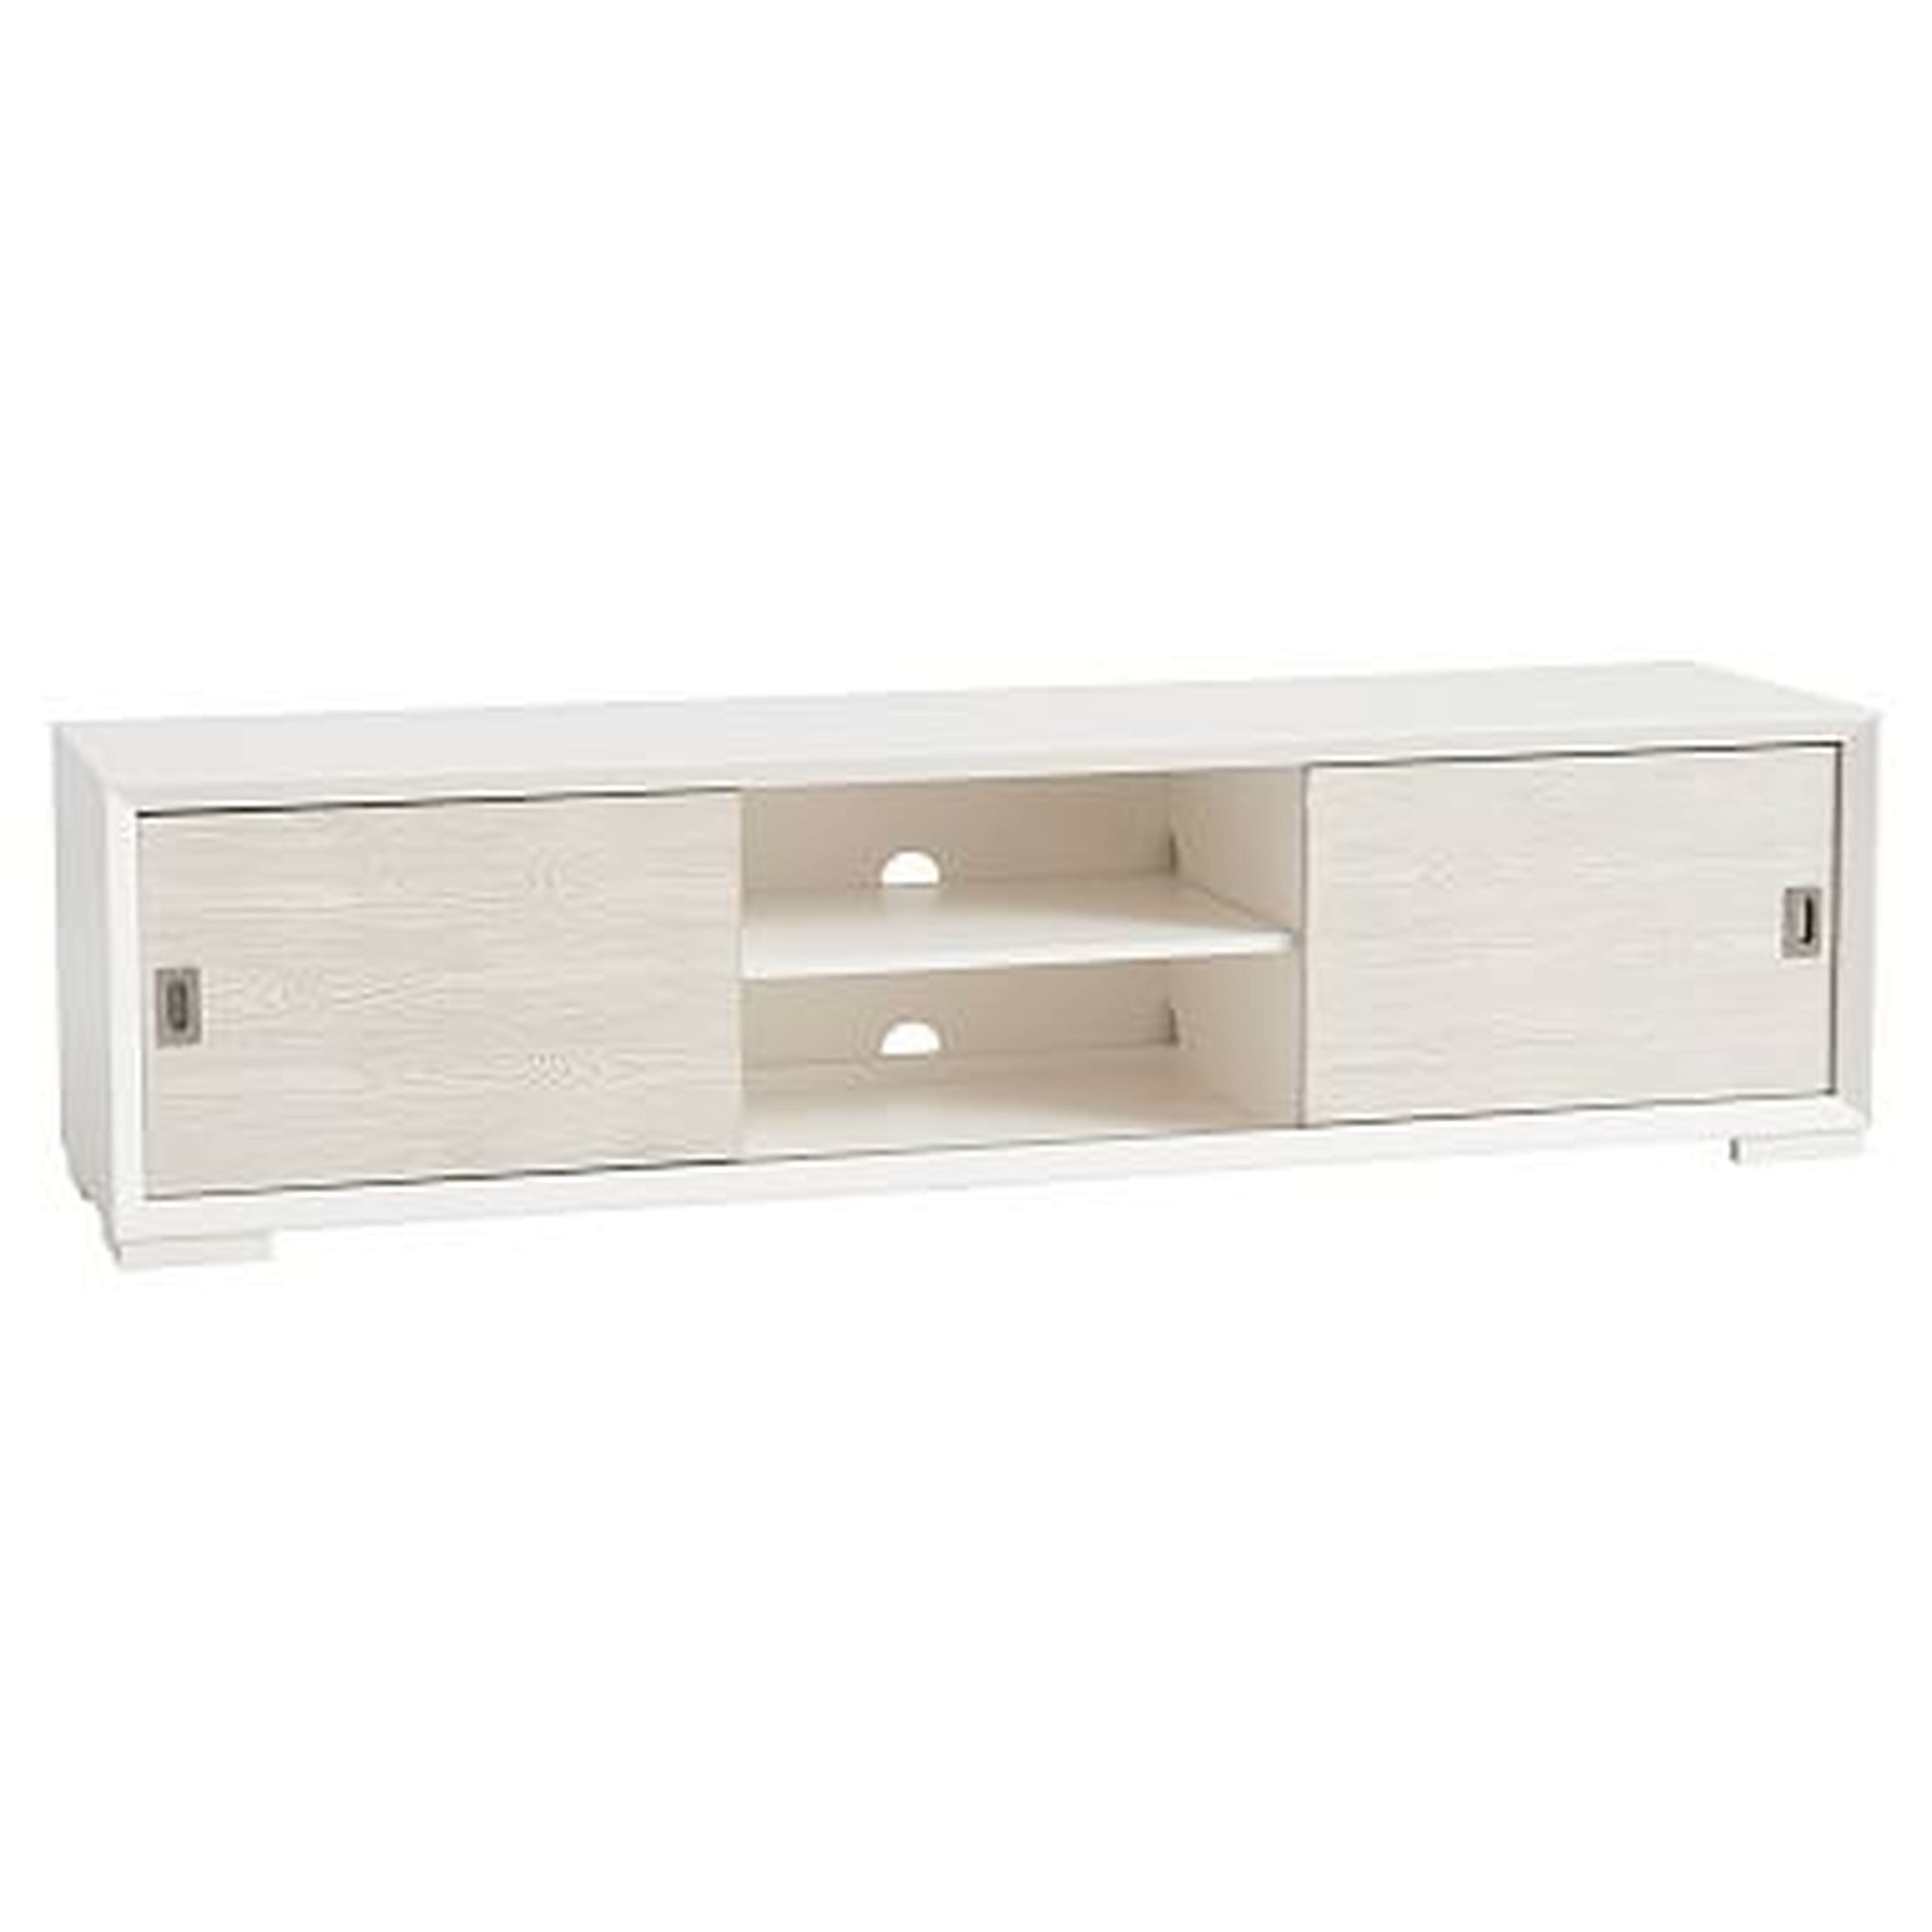 Callum Media Console, Simply White/ Weathered White - Pottery Barn Teen